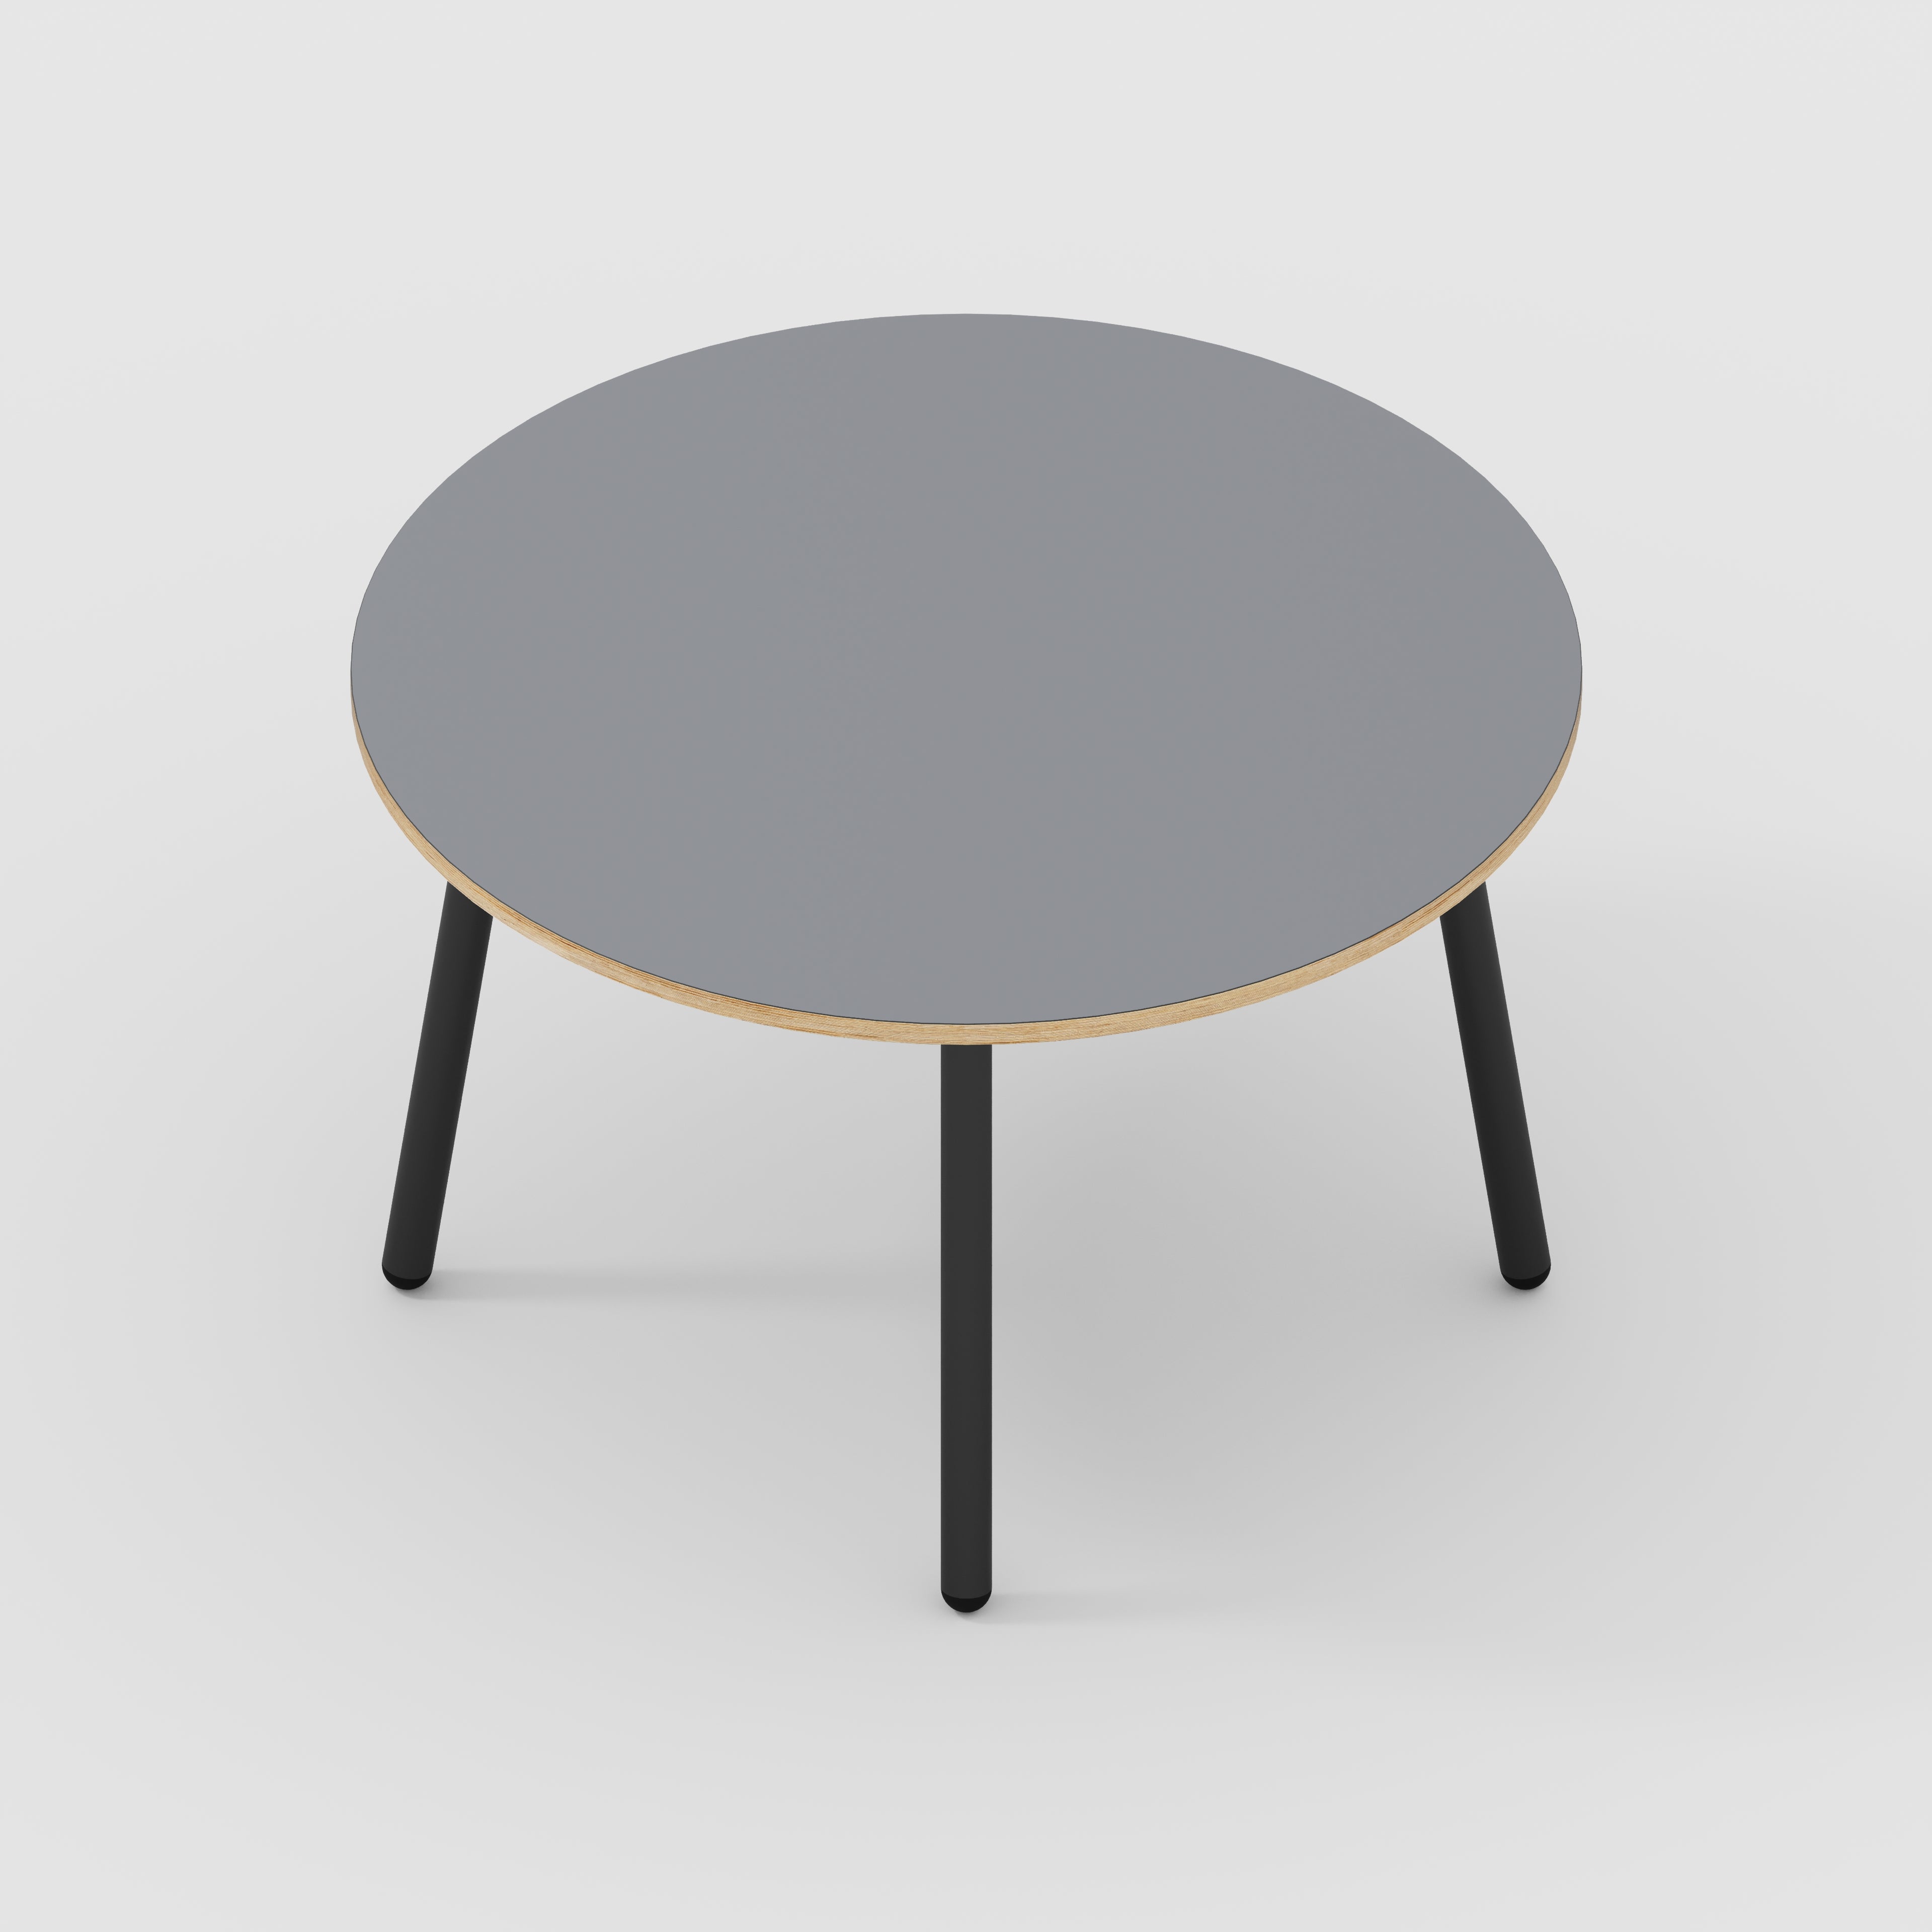 Round Table with Black Round Single Pin Legs - Formica Tornado Grey - 1200(dia) x 735(h)